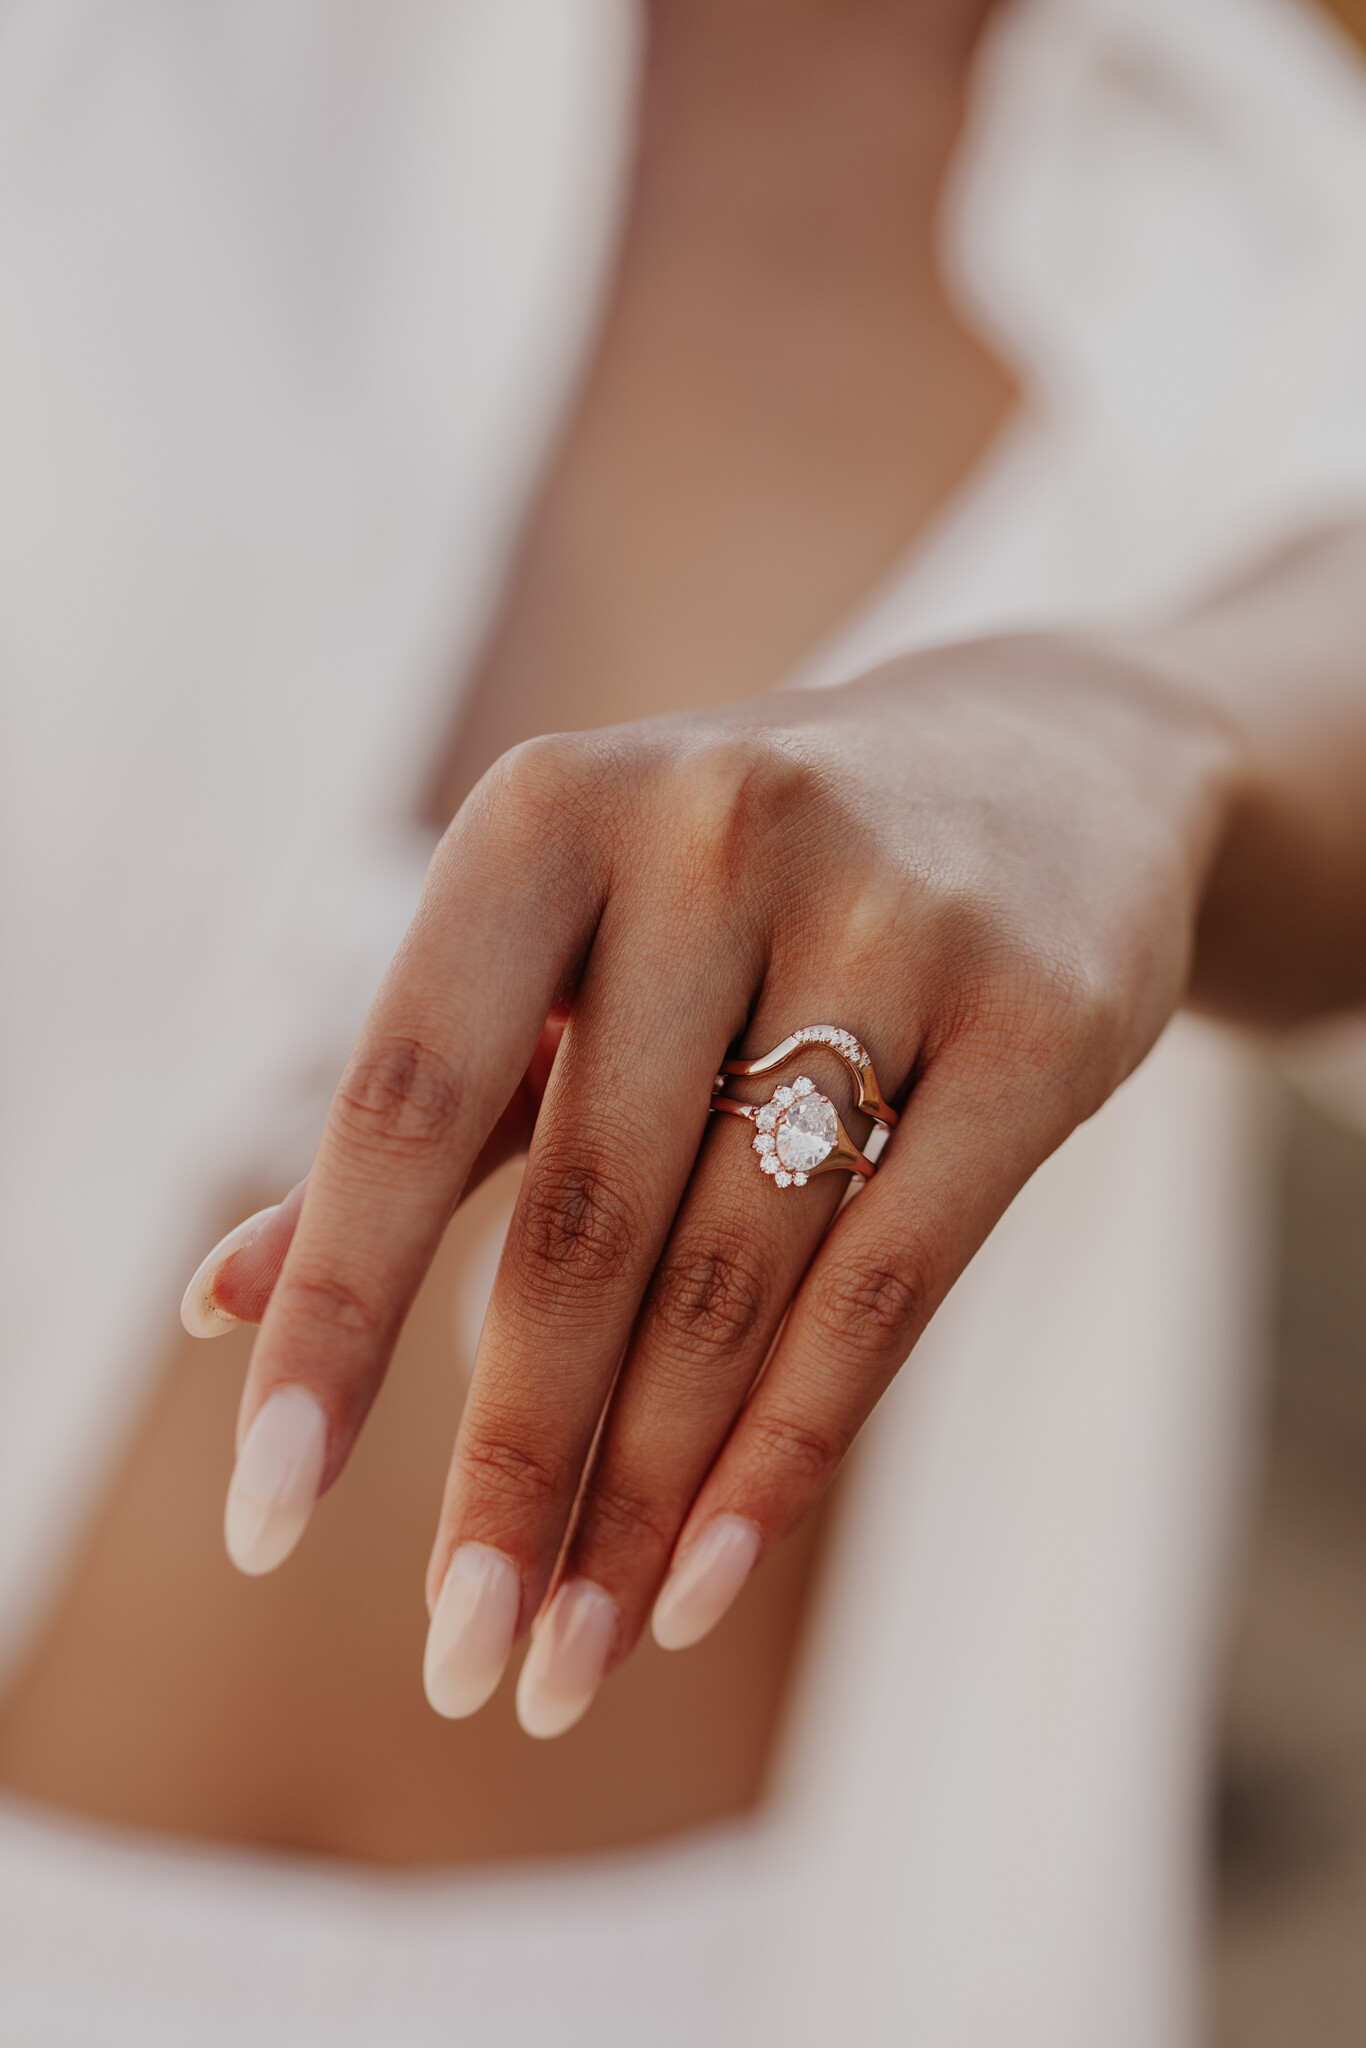 How To Find An Engagement Ring Store Near Me | Denver, CO